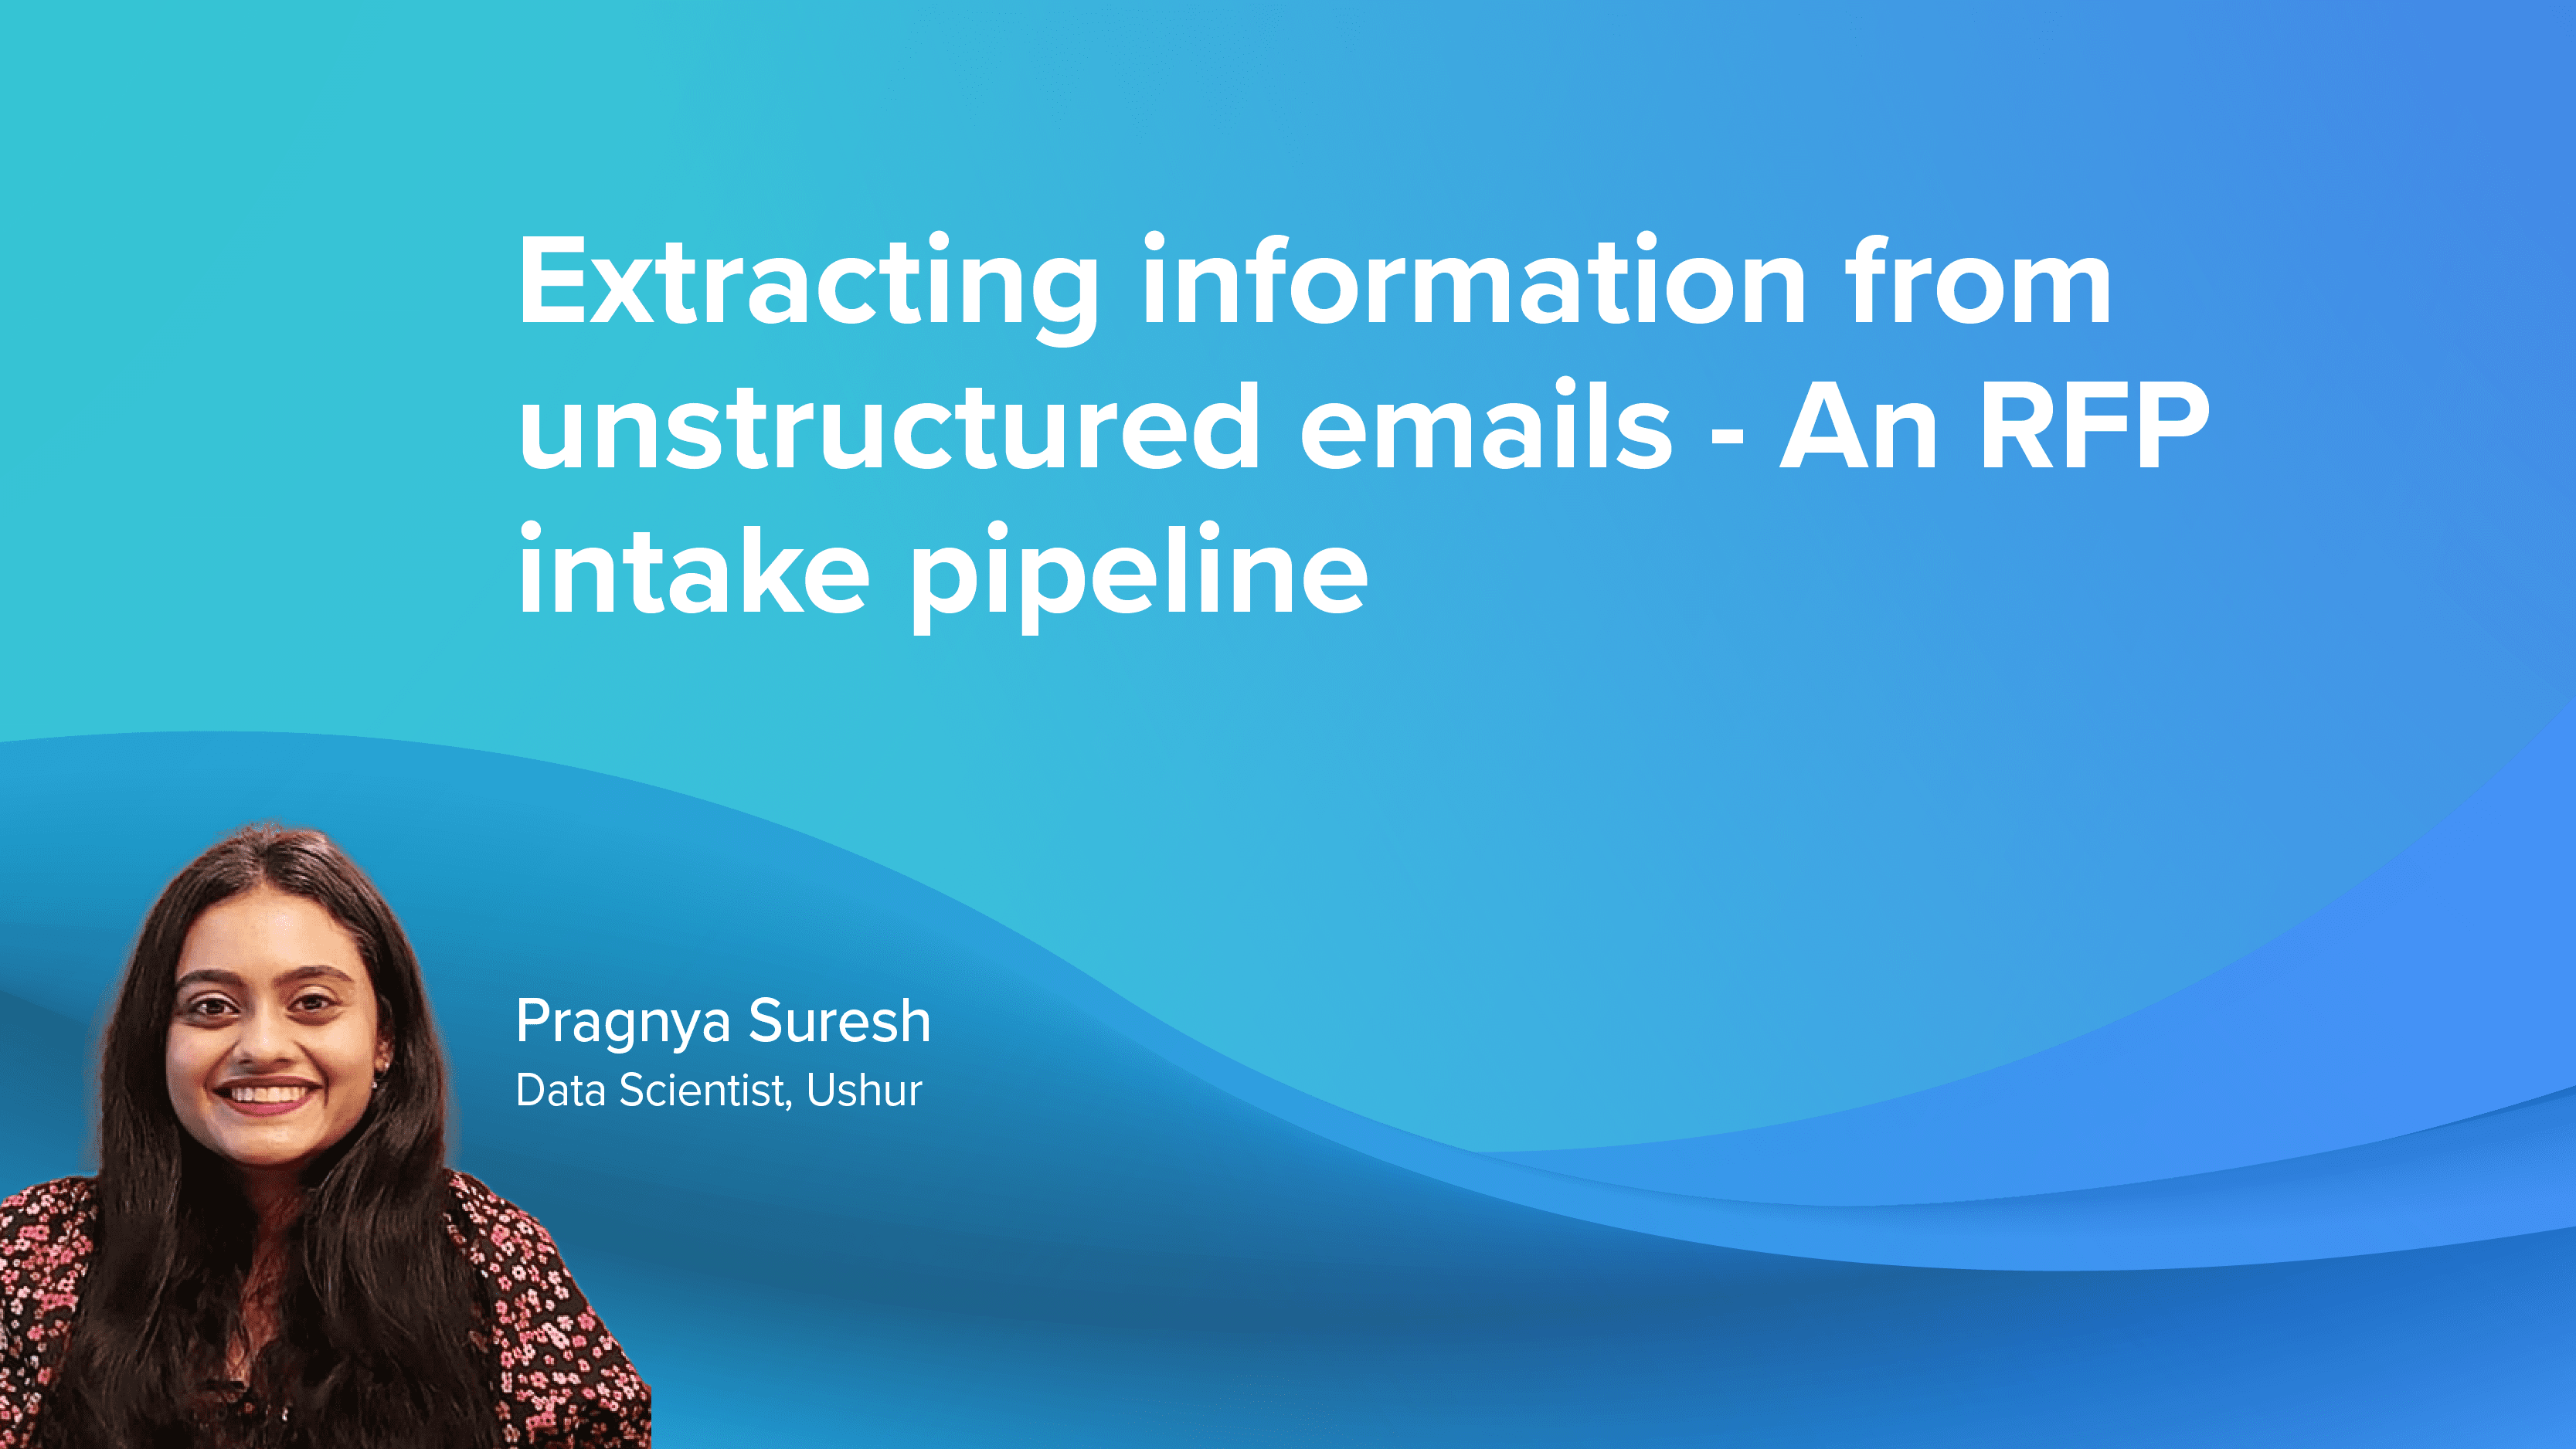 Extracting information from unstructured emails - An RFP intake pipeline